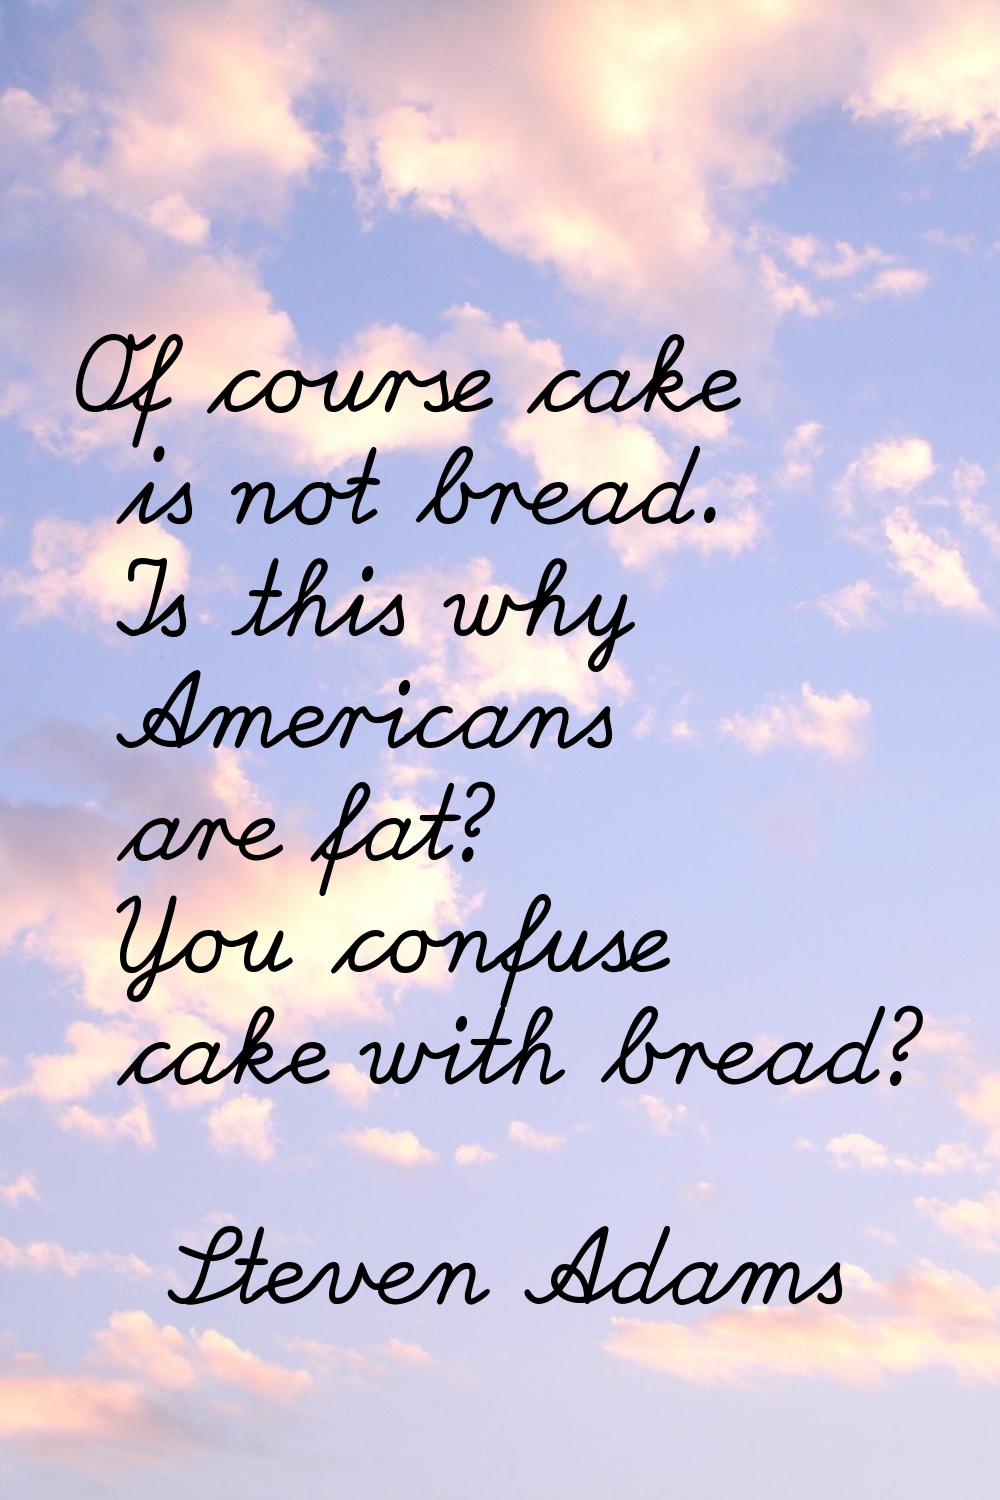 Of course cake is not bread. Is this why Americans are fat? You confuse cake with bread?